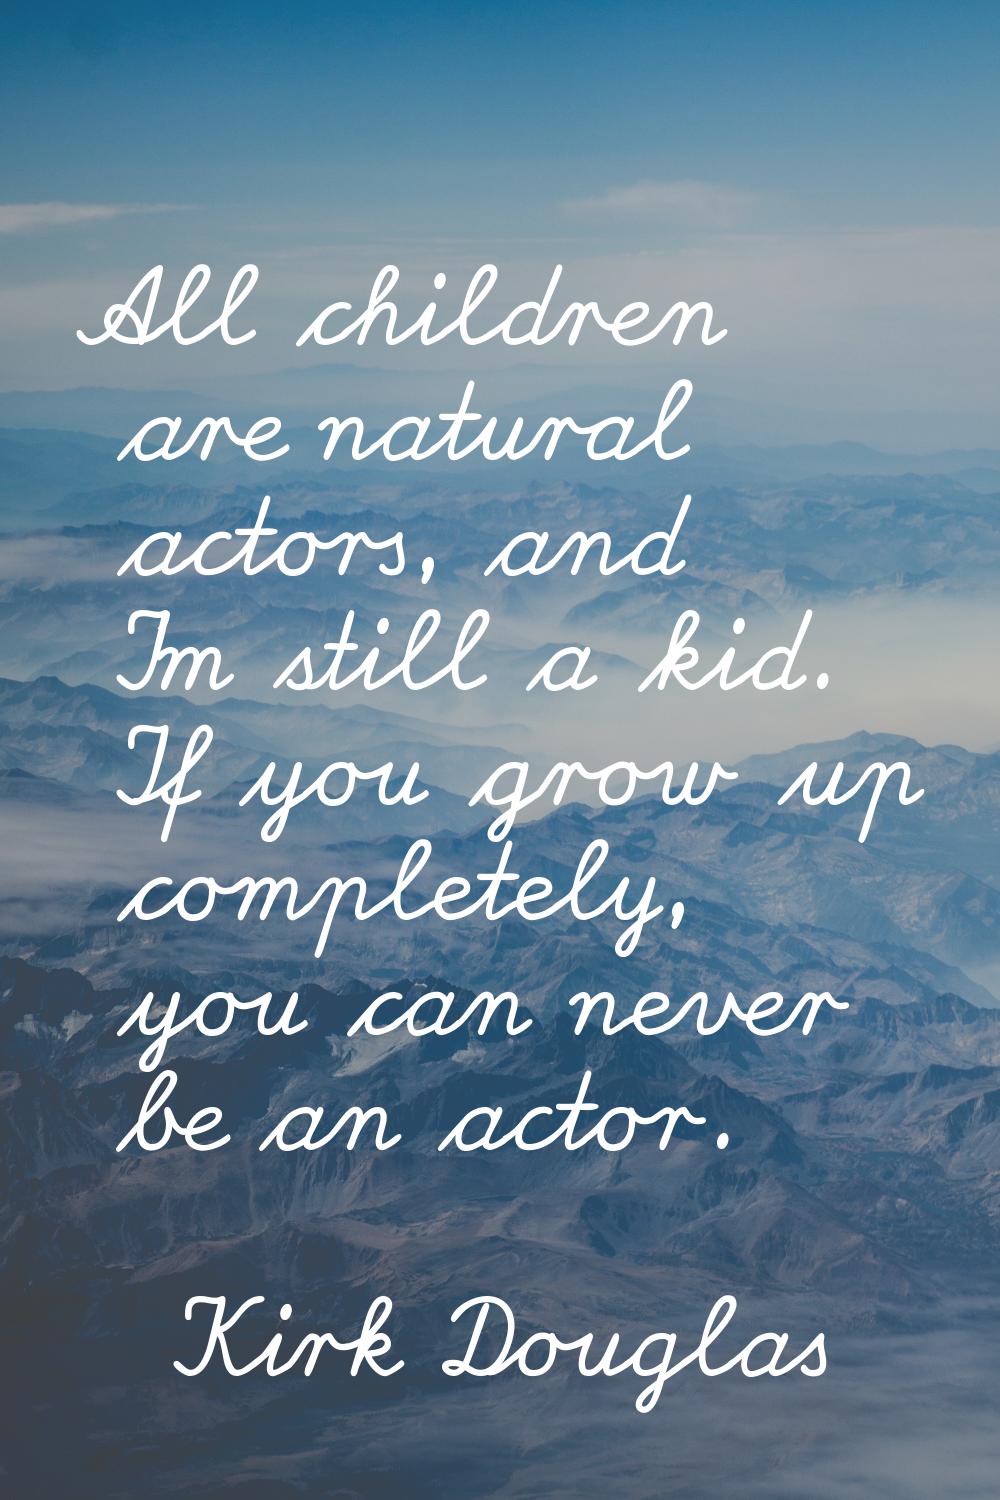 All children are natural actors, and I'm still a kid. If you grow up completely, you can never be a